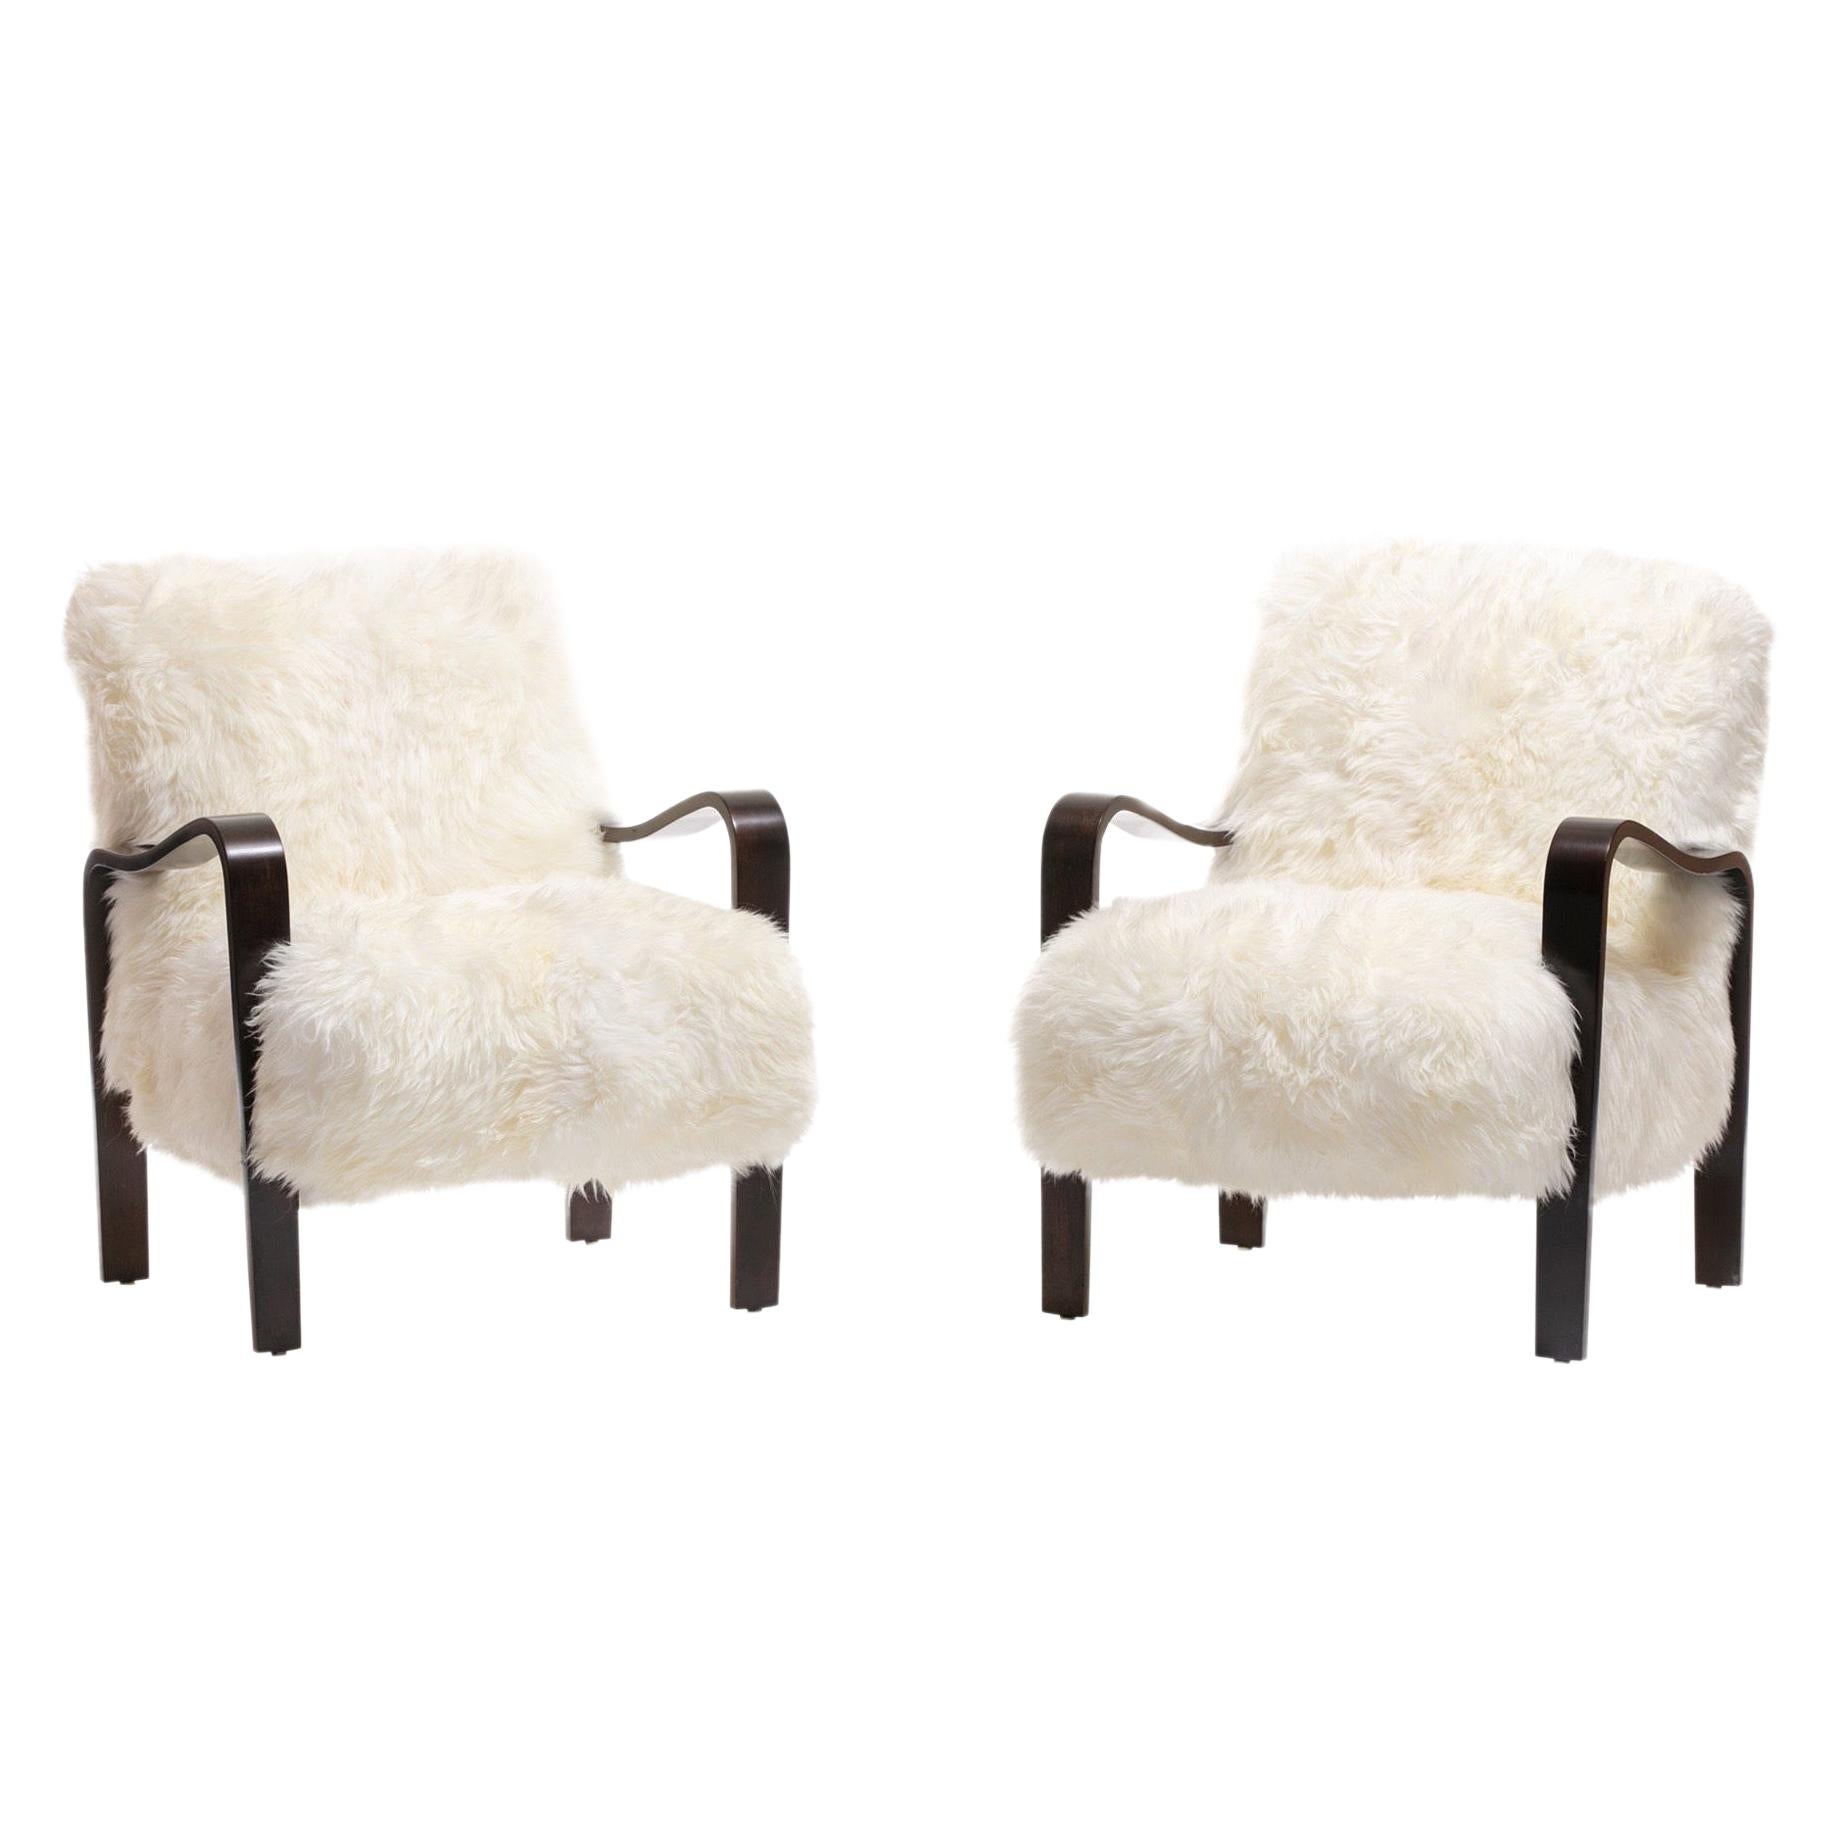 Pair of Thonet Sculptural Bentwood and Ivory Sheepskin Armchairs, circa 1950